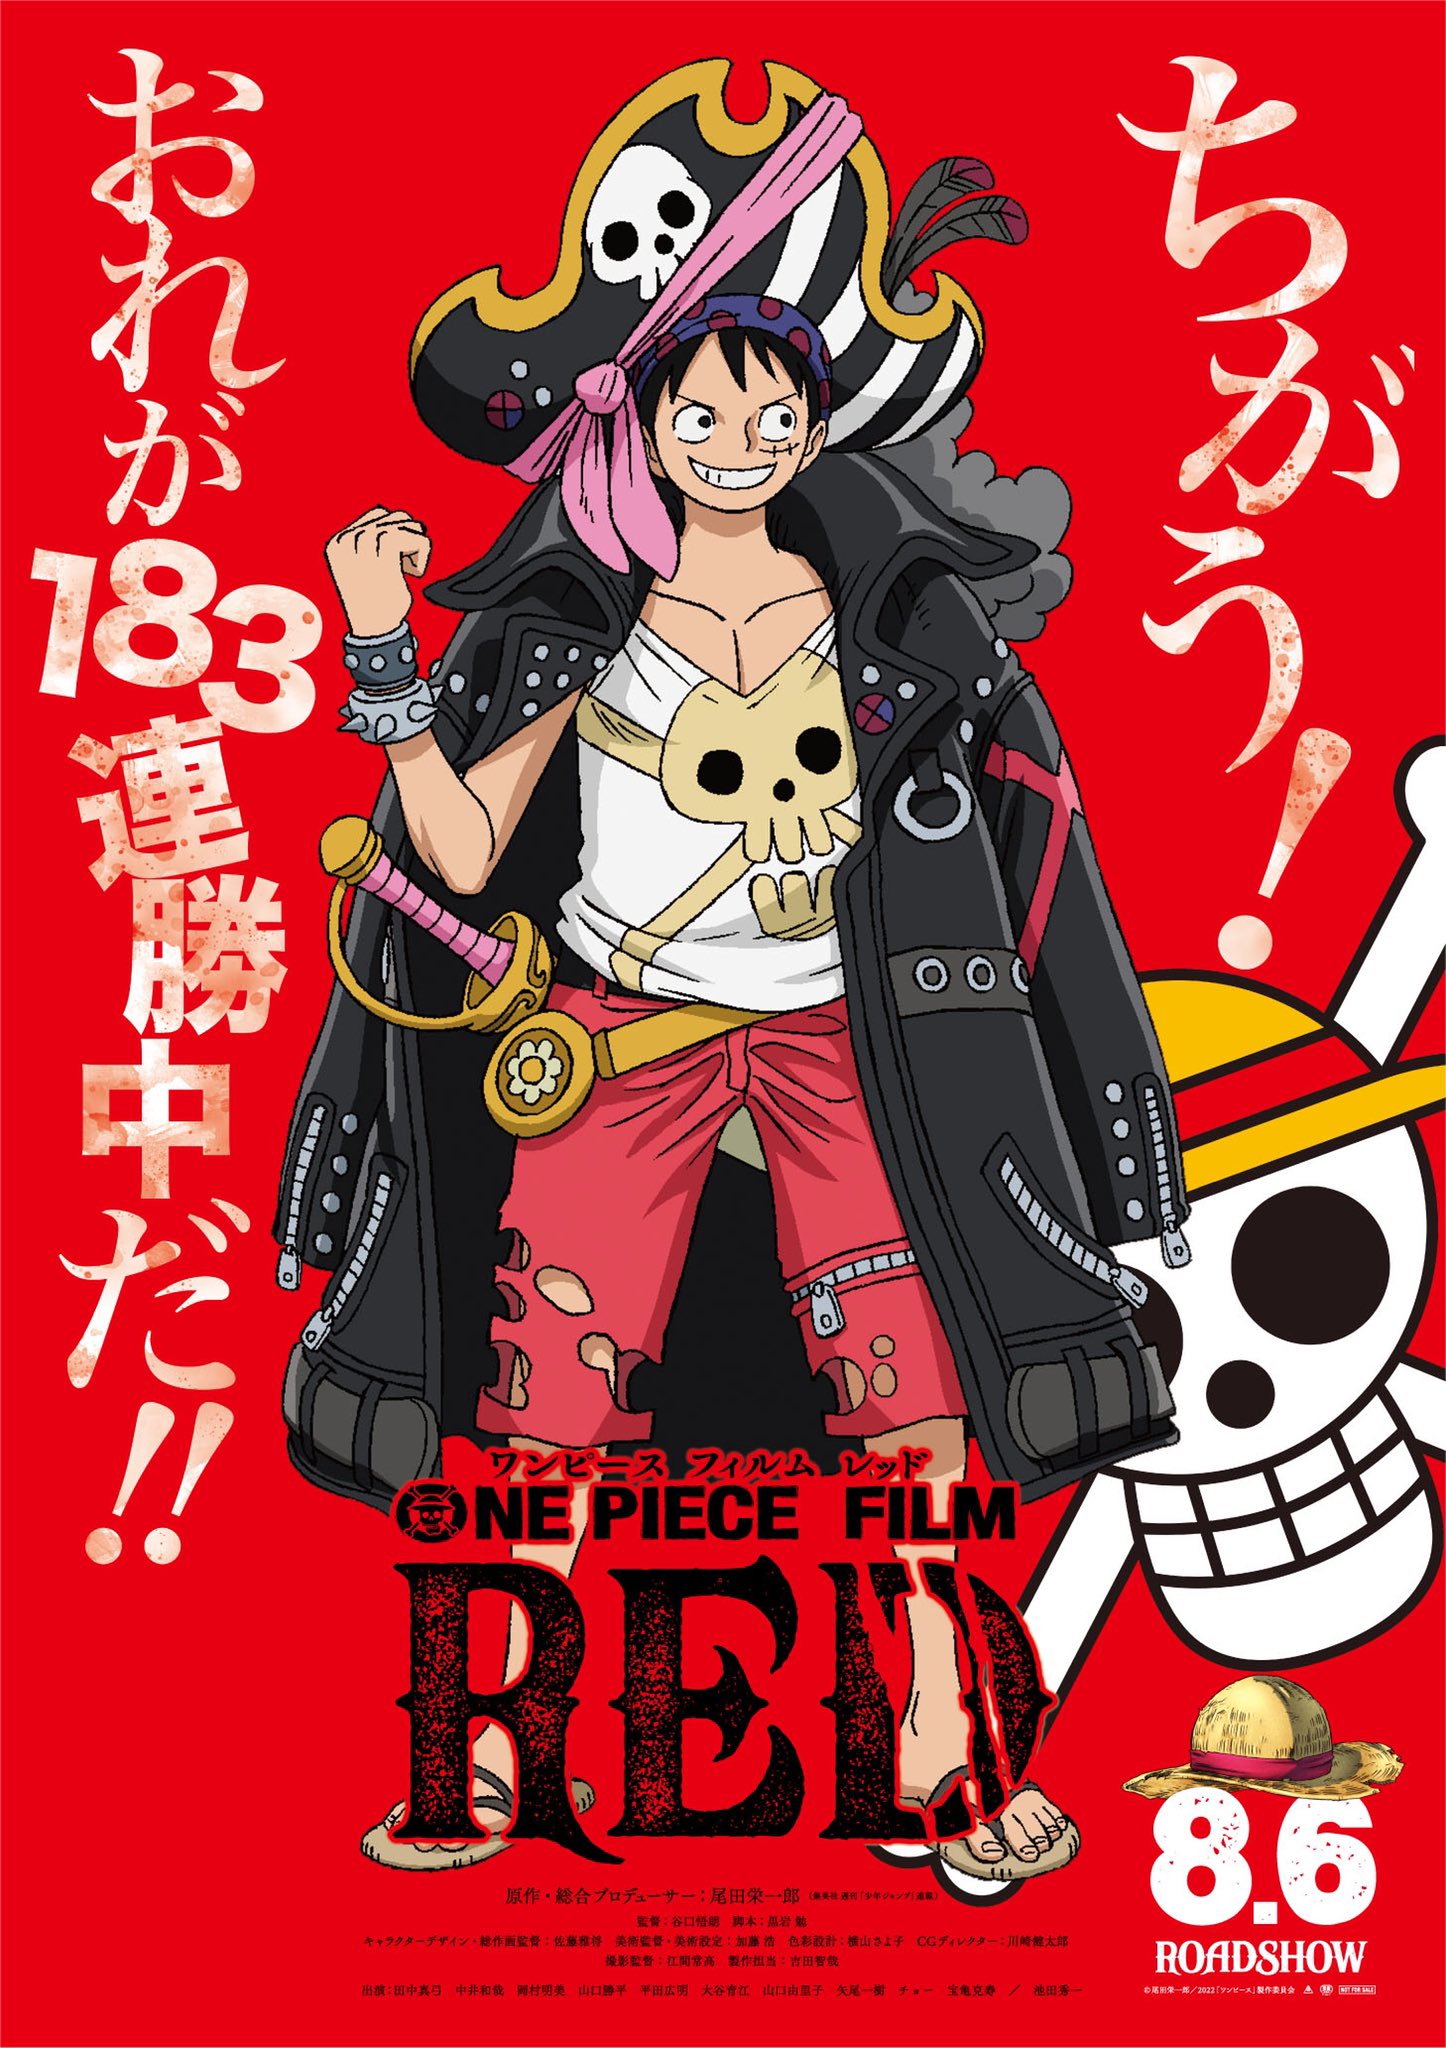 Crunchyroll Sets Theatrical Release For 'One Piece Film Red